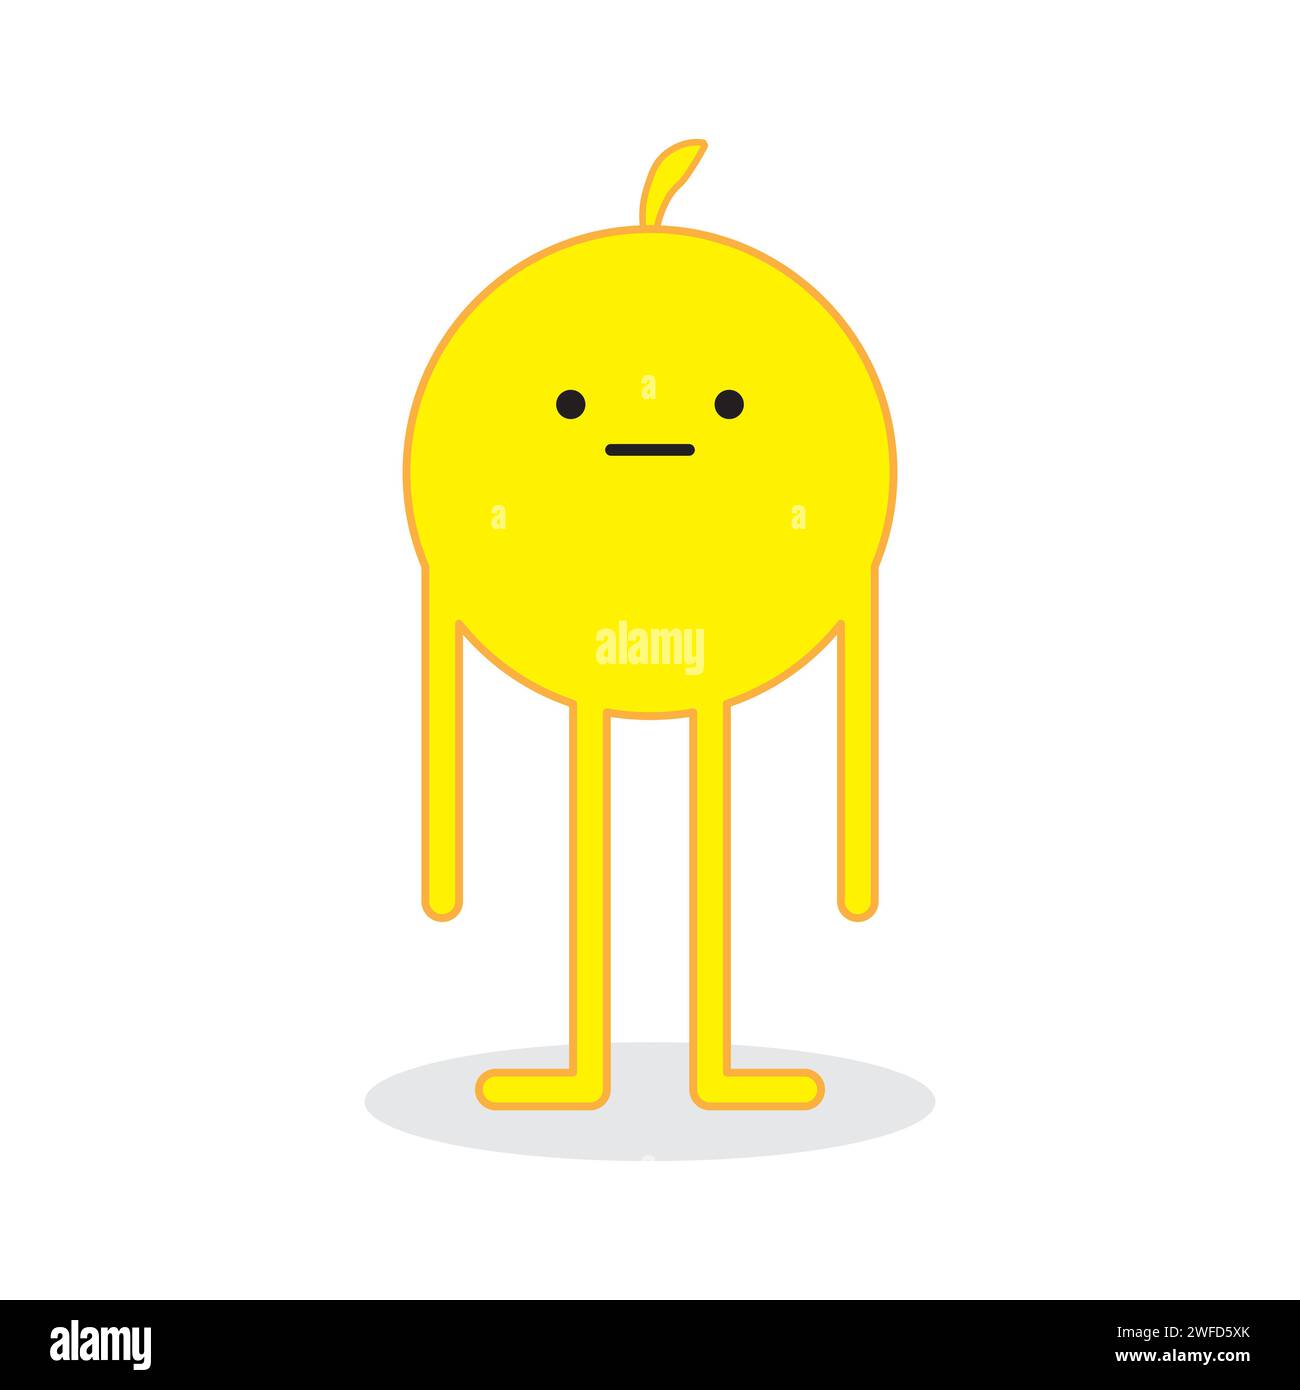 Abstract icon with yellow weirdo. crazy cartoon character illustration design. Vector illustration. stock image. EPS 10. Stock Vector